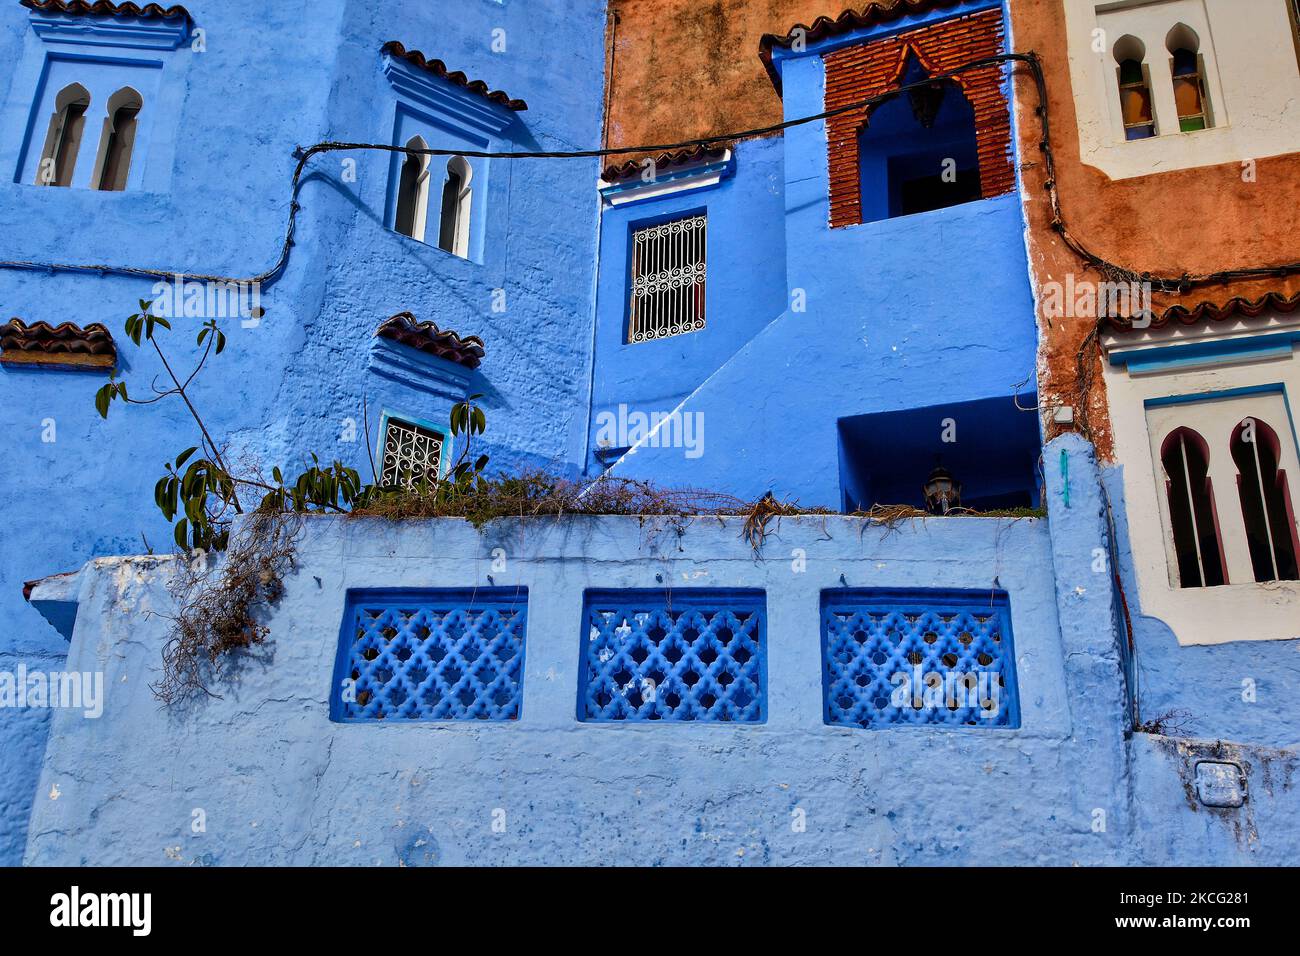 Buildings in city of Chefchaouen located in the Rif Mountains in Morocco, Africa. Chefchaouen (also called Chaouen) is known as the 'Blue City' due to the fact that many of its buildings are painted blue in colour, which is said to symbolize the sky and heaven, and serve as a reminder to lead a spiritual life. (Photo by Creative Touch Imaging Ltd./NurPhoto) Stock Photo